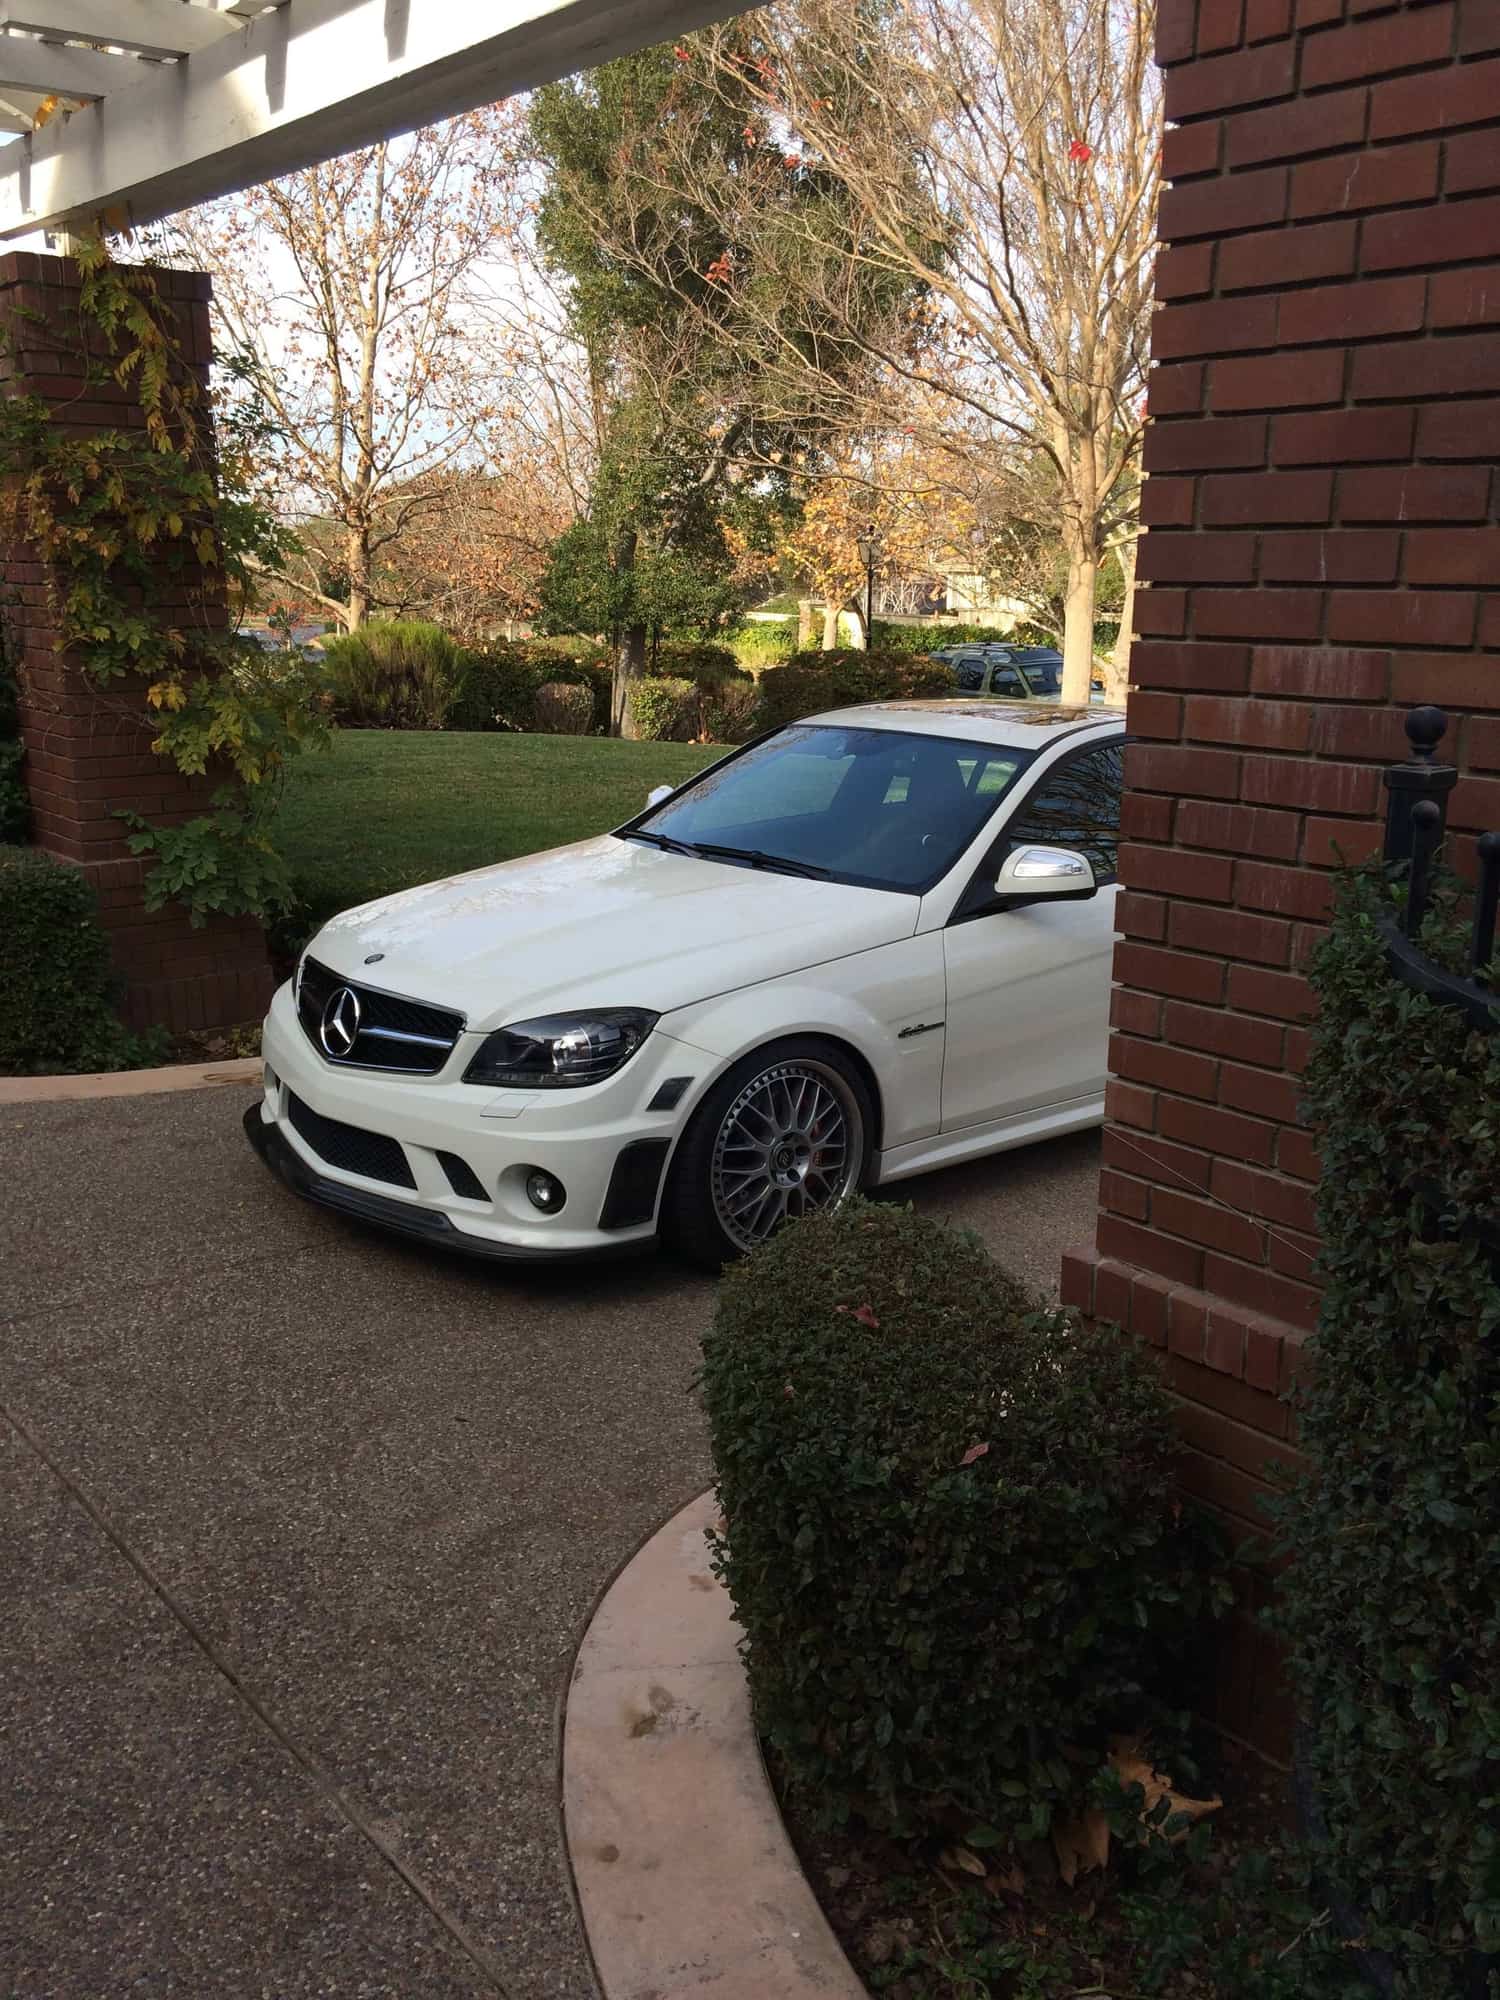 2009 Mercedes-Benz C63 AMG - 2009 C63 AMG, Widebody, Heabolts and Tappets done - Used - VIN WDDGF77X59F240220 - 61,000 Miles - 2WD - Automatic - Sedan - White - Austin, TX 78717, United States